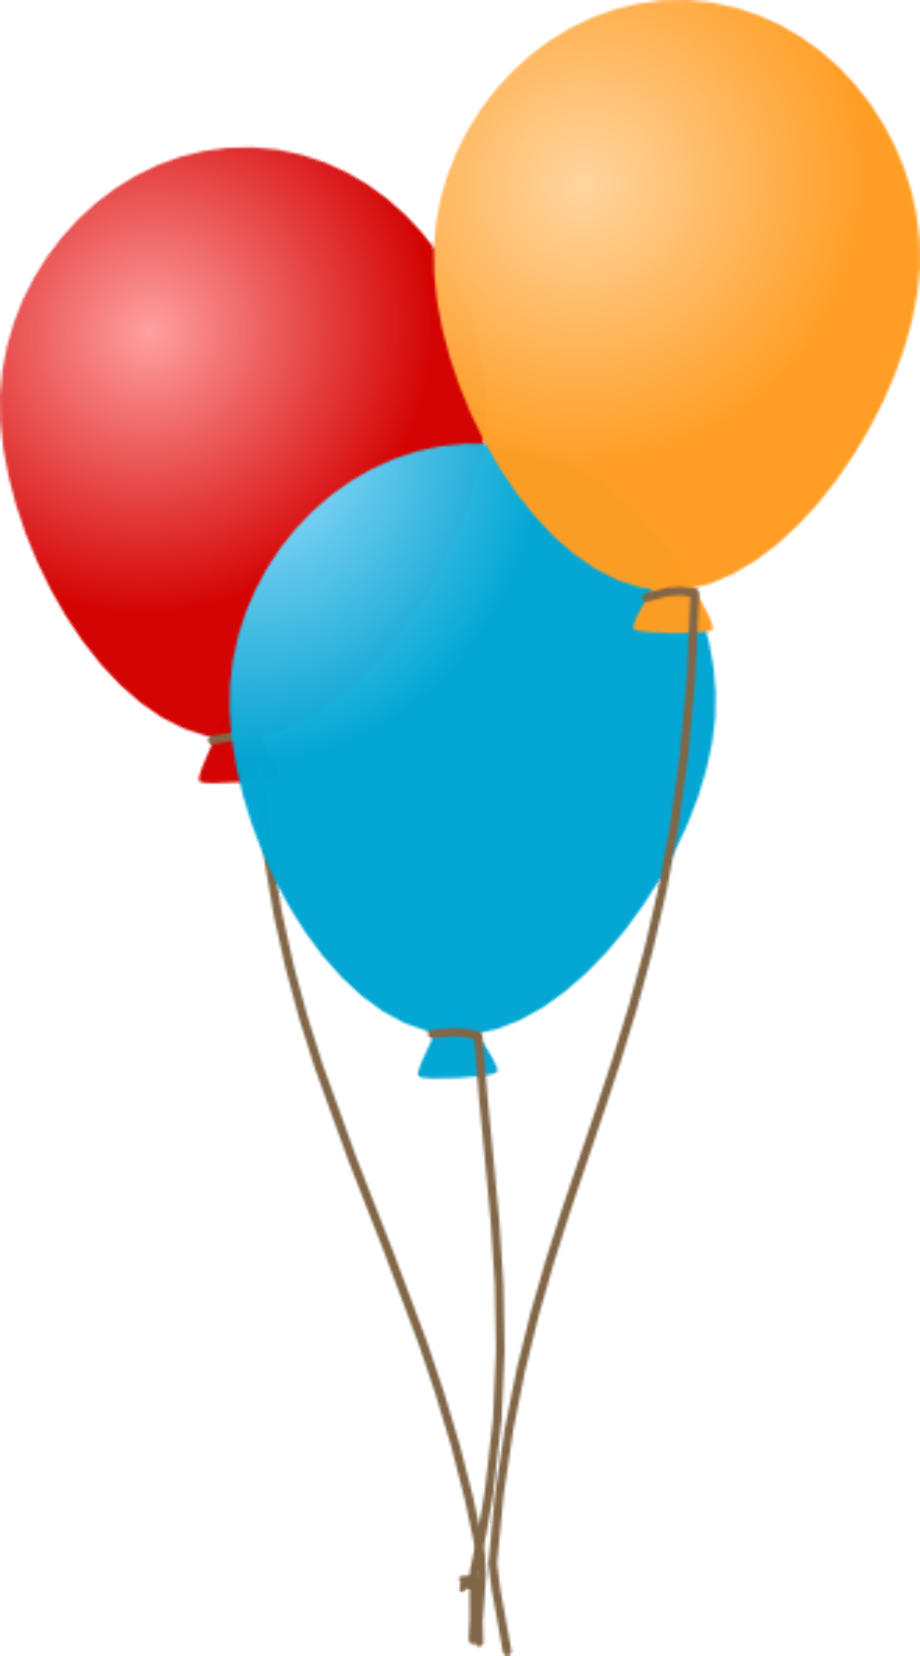 Download High Quality balloon clipart vector Transparent PNG Images ...